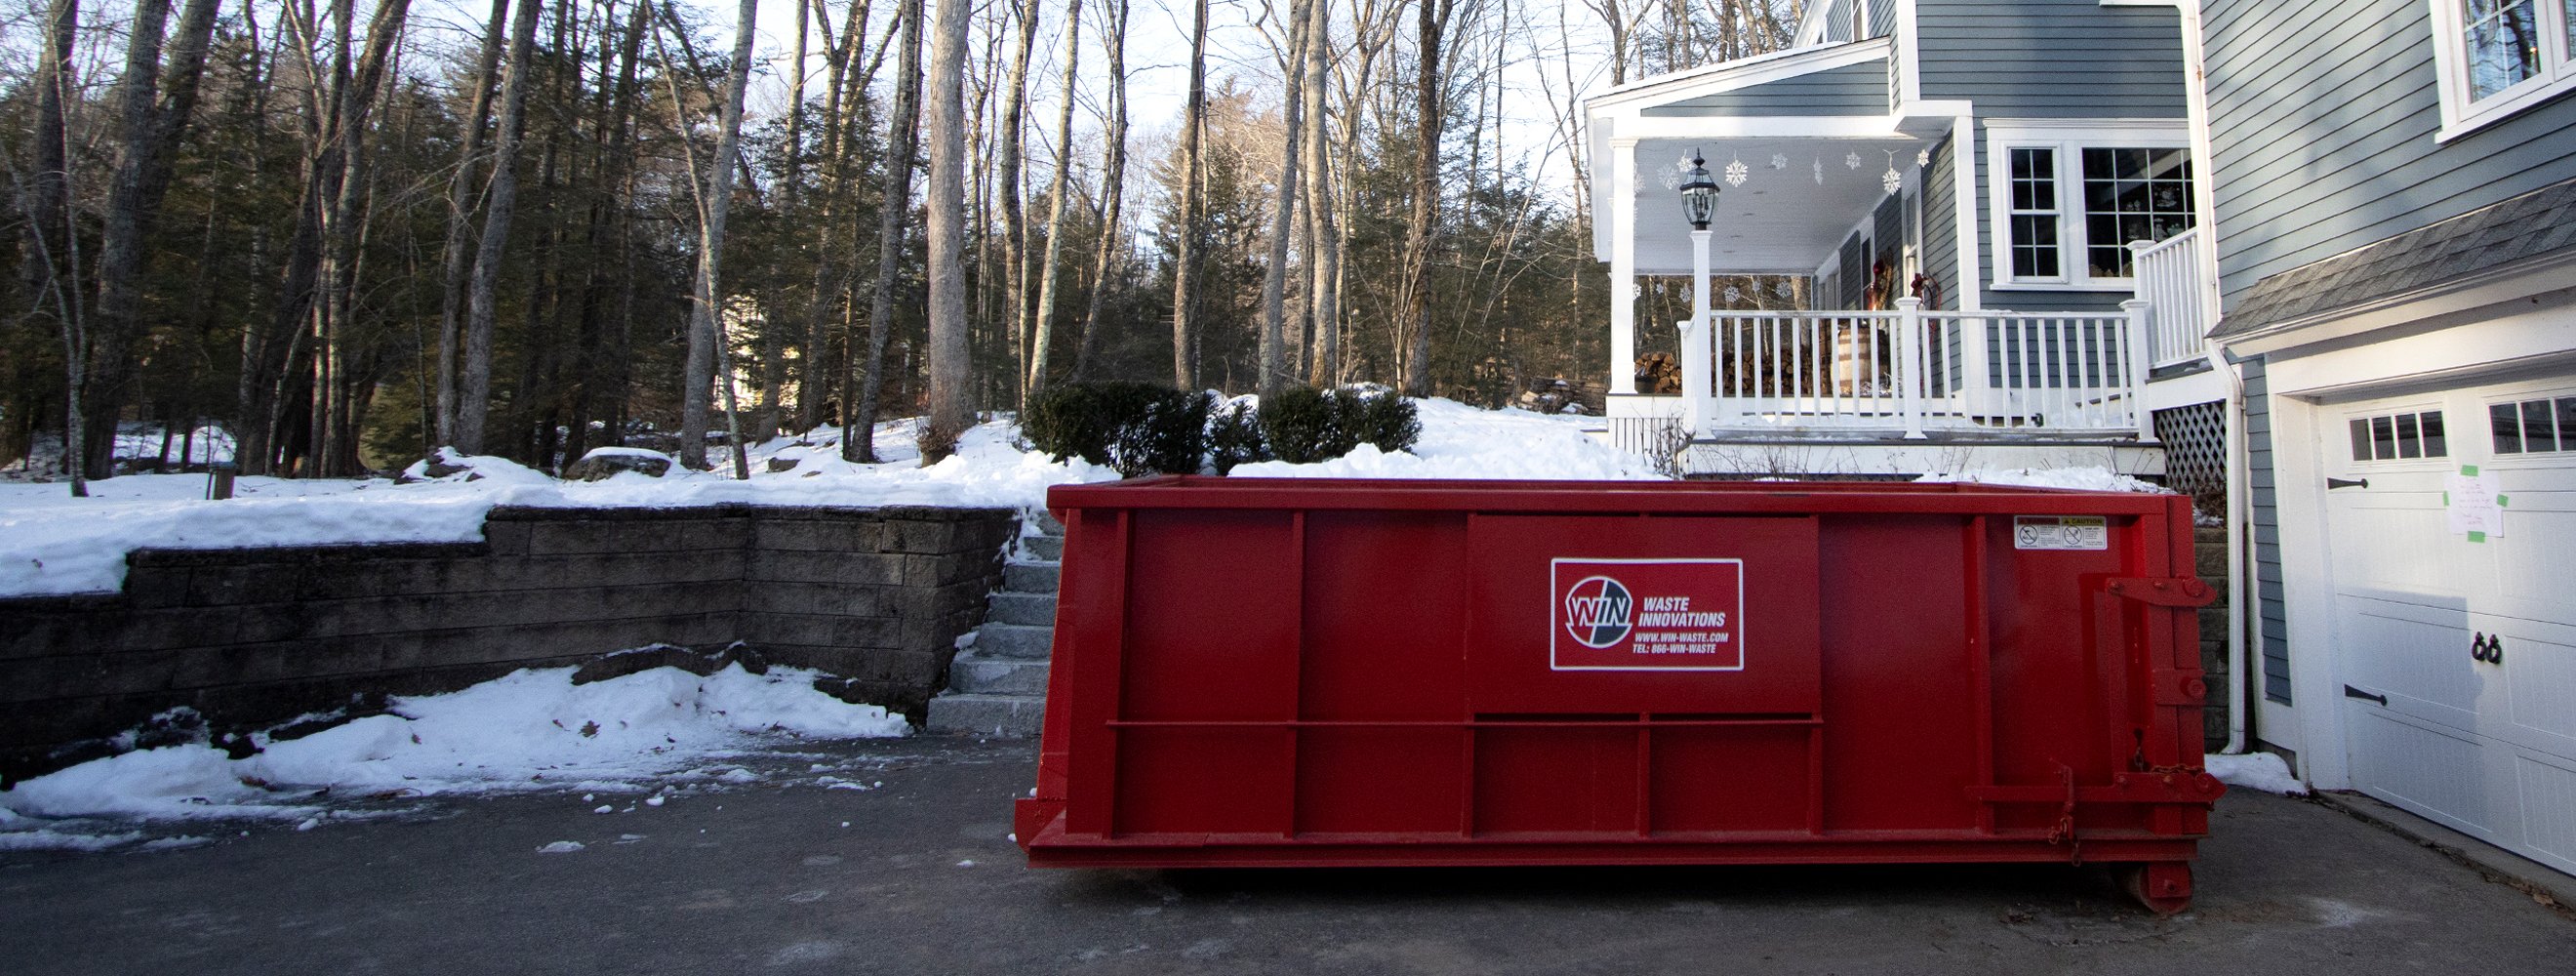 Dumpster Rentals in Allegheny County PA